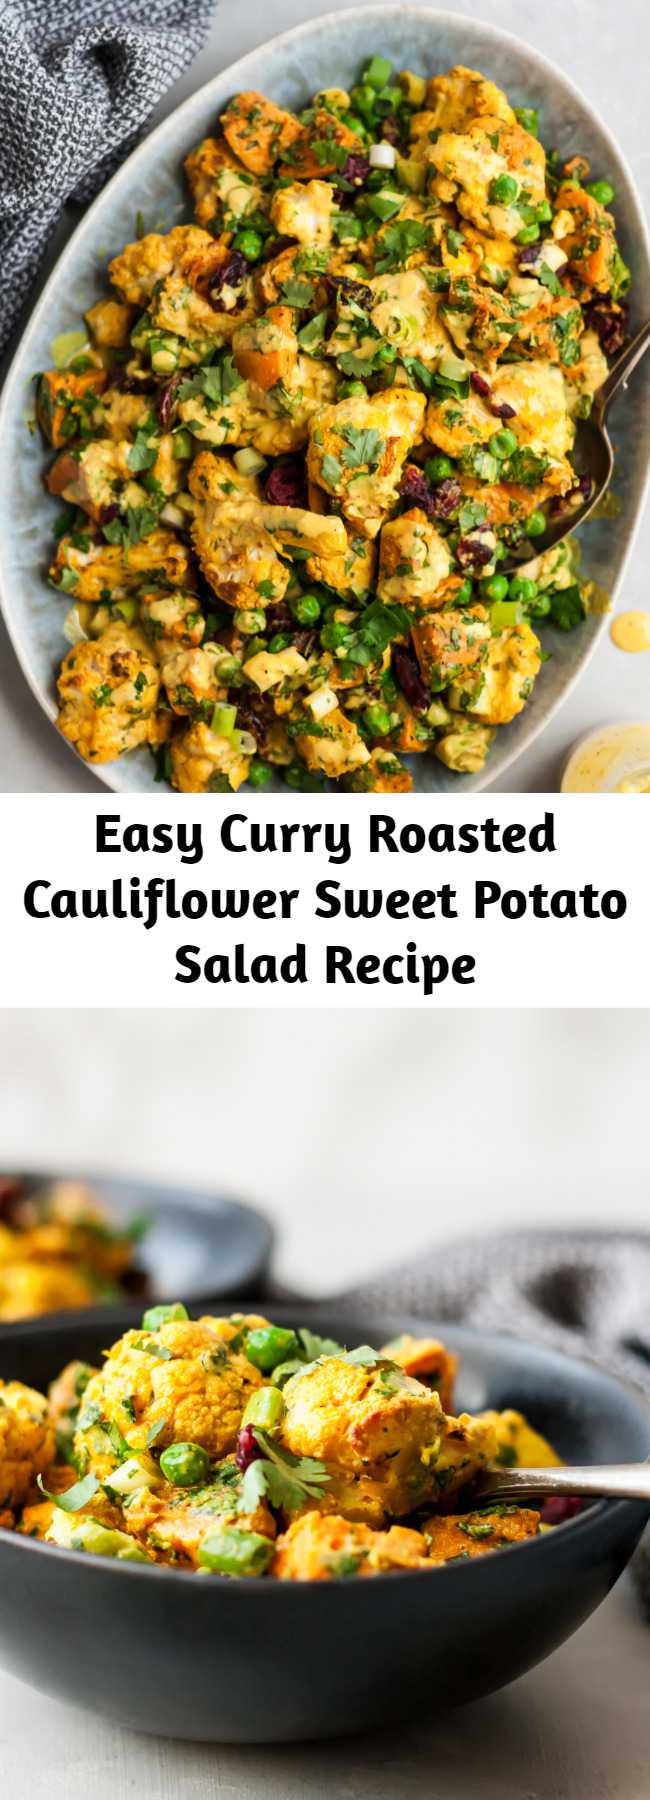 Easy Curry Roasted Cauliflower Sweet Potato Salad Recipe - Vegan and gluten free curry roasted cauliflower sweet potato salad with a creamy curry tahini dressing. This salad is everything you could ever want. Easy to make, packed with veggies and absolutely addicting! #veganrecipes #healthylunch #lunchideas #sweetpotatoes #whole30recipes #dairyfree #glutenfreerecipes #saladrecipes